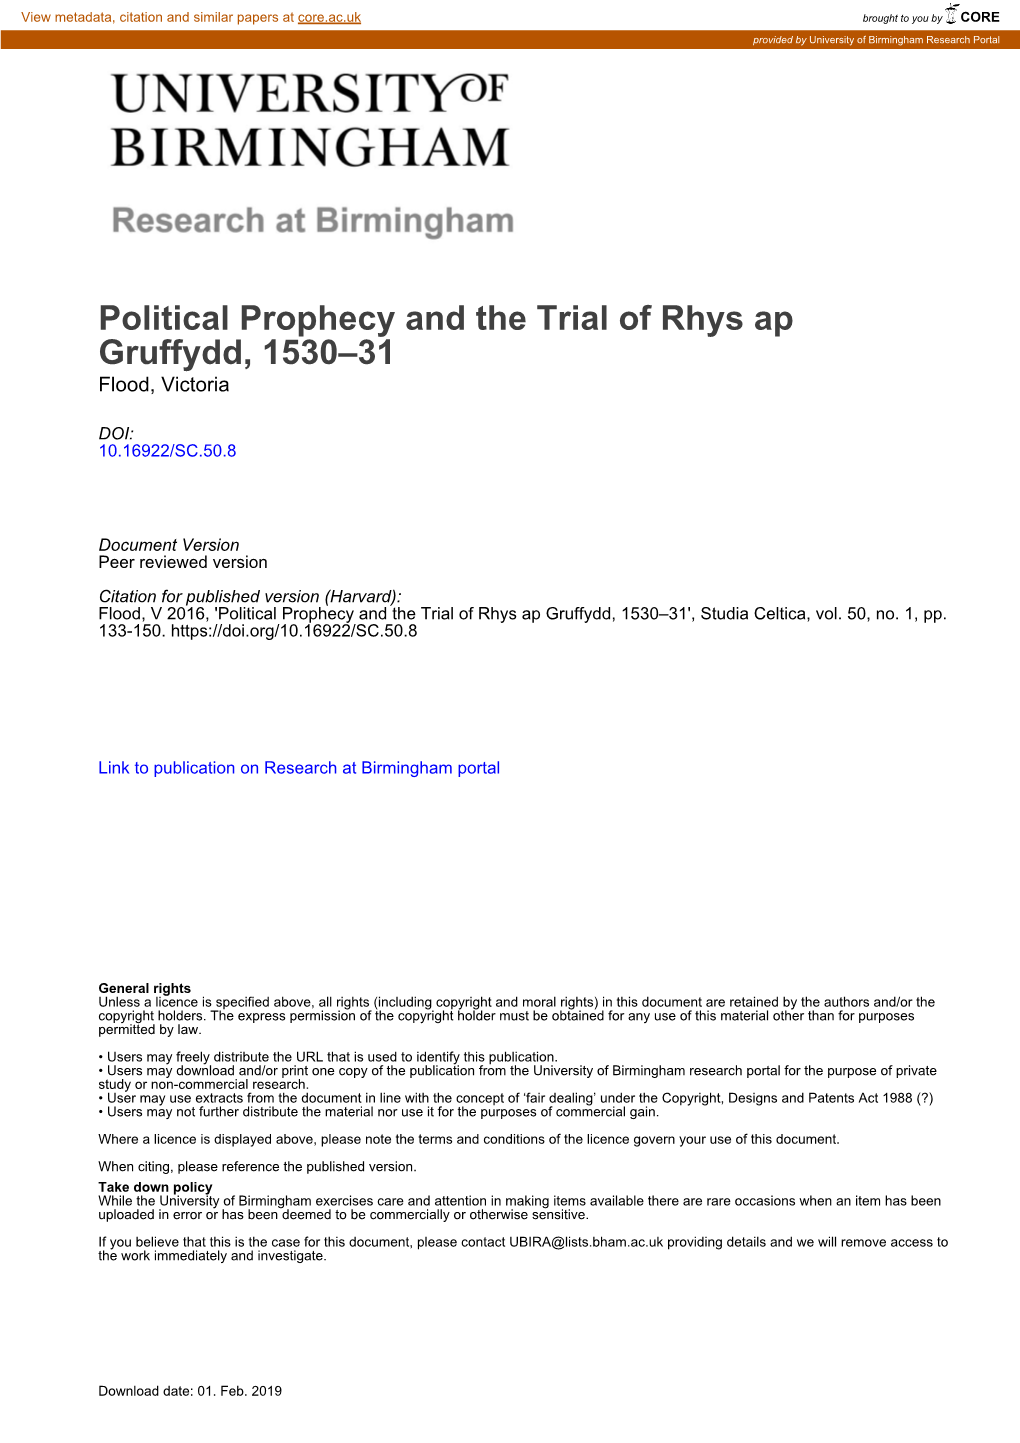 Political Prophecy and the Trial of Rhys Ap Gruffydd, 1530–31 Flood, Victoria